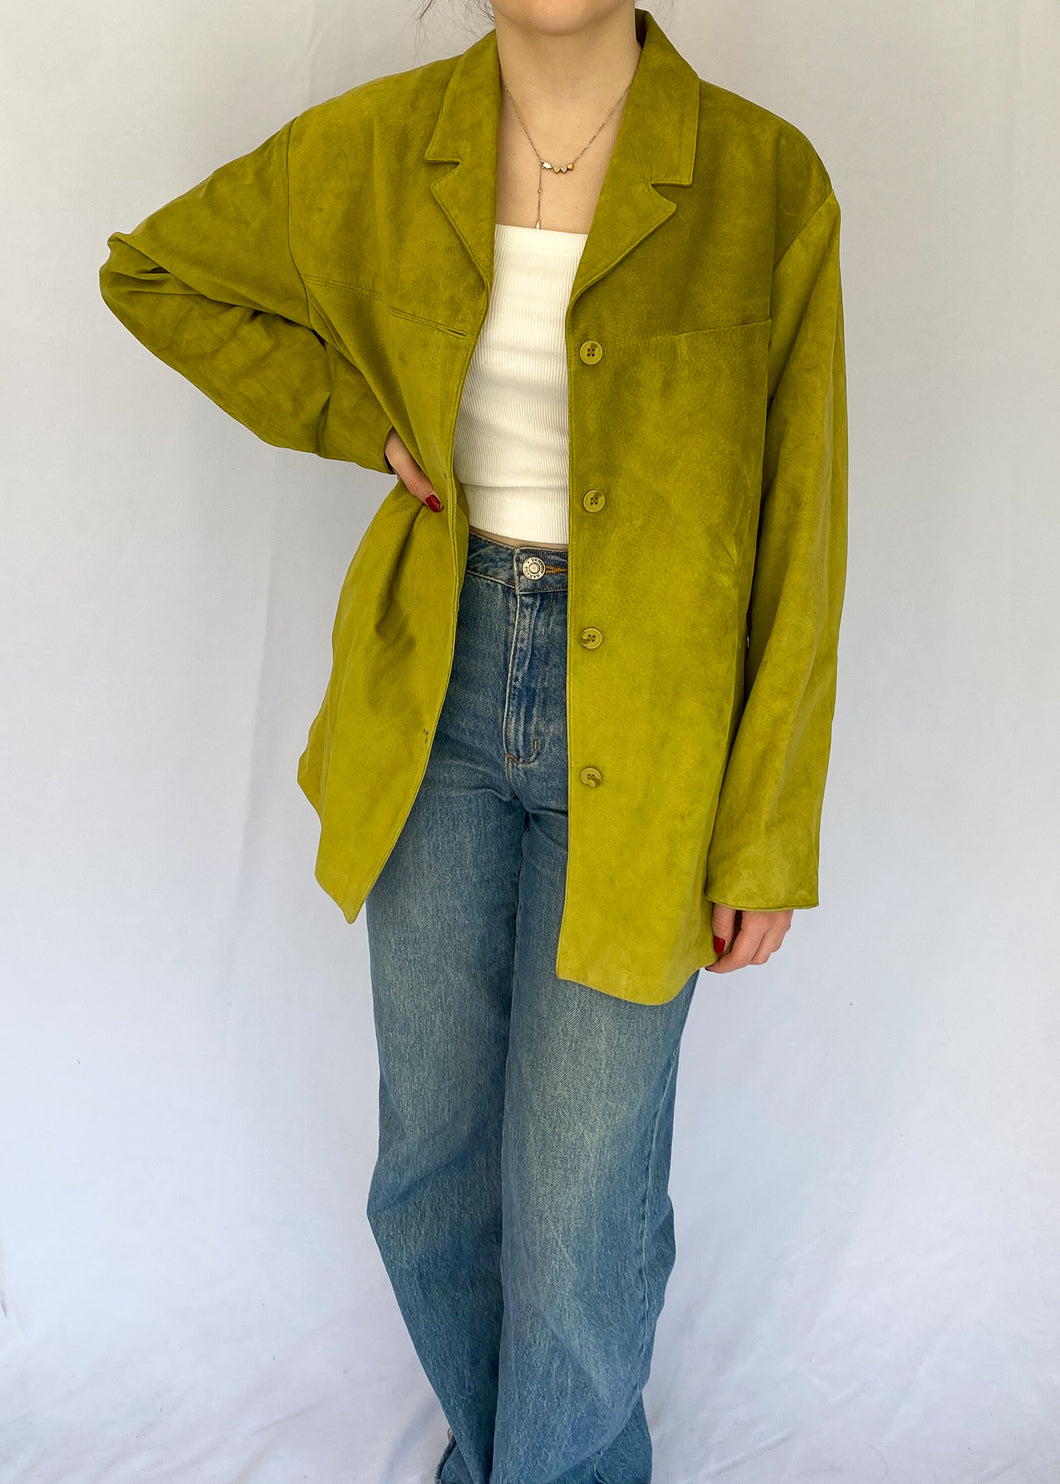 90's Lime Green Suede Blazer